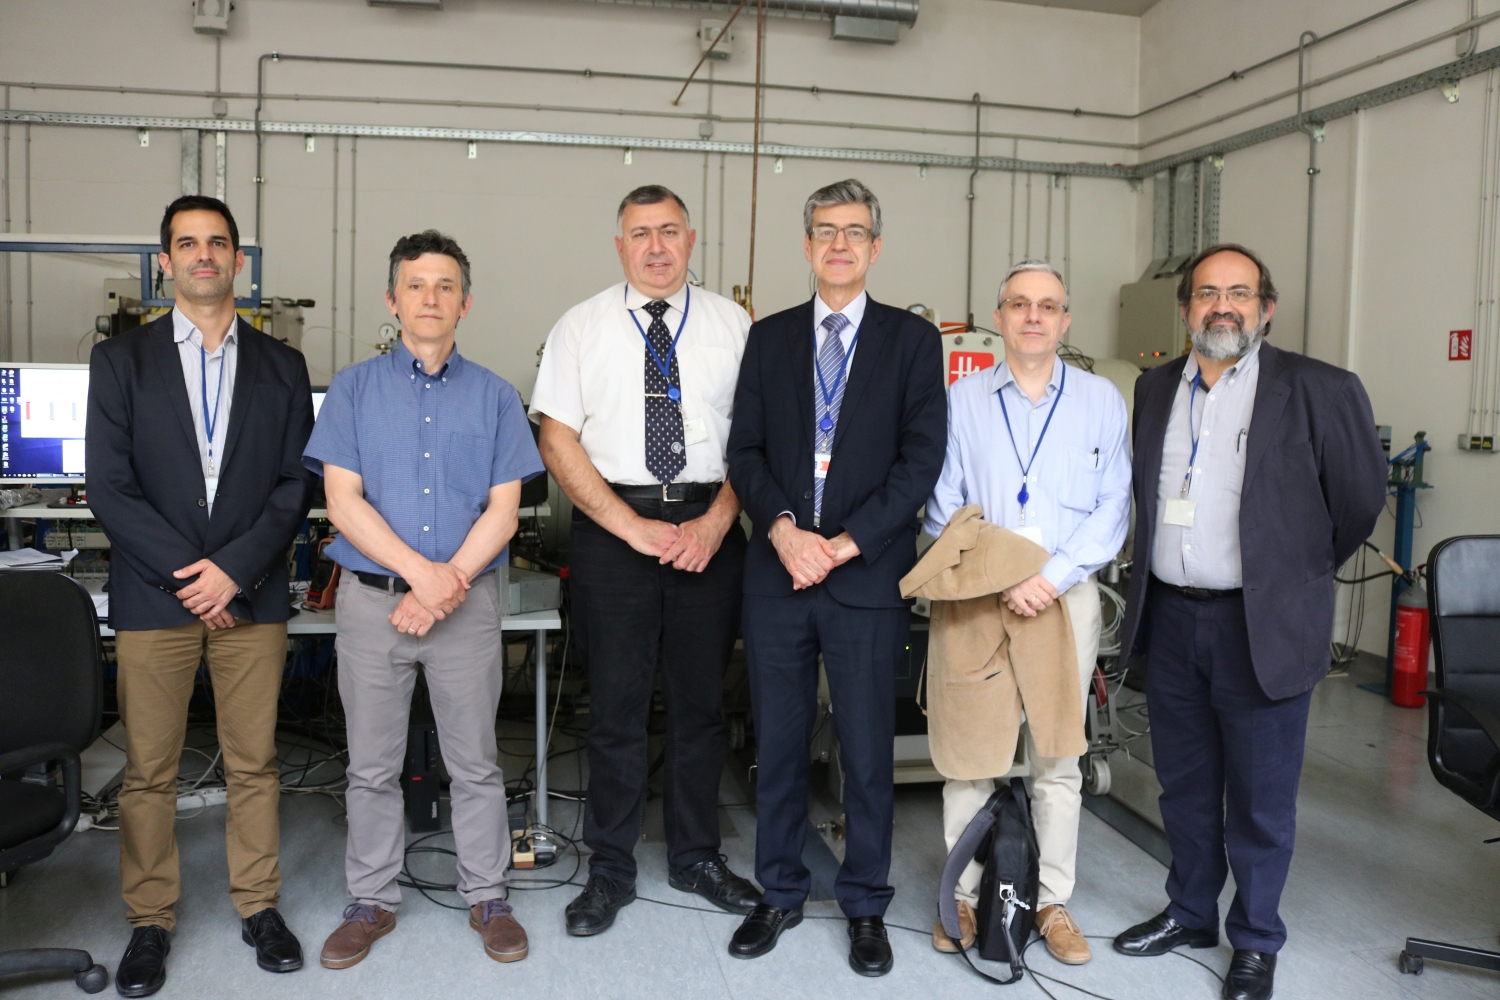 RBI Hosts the Spanish - Croatian workshop on DONES and Fusion